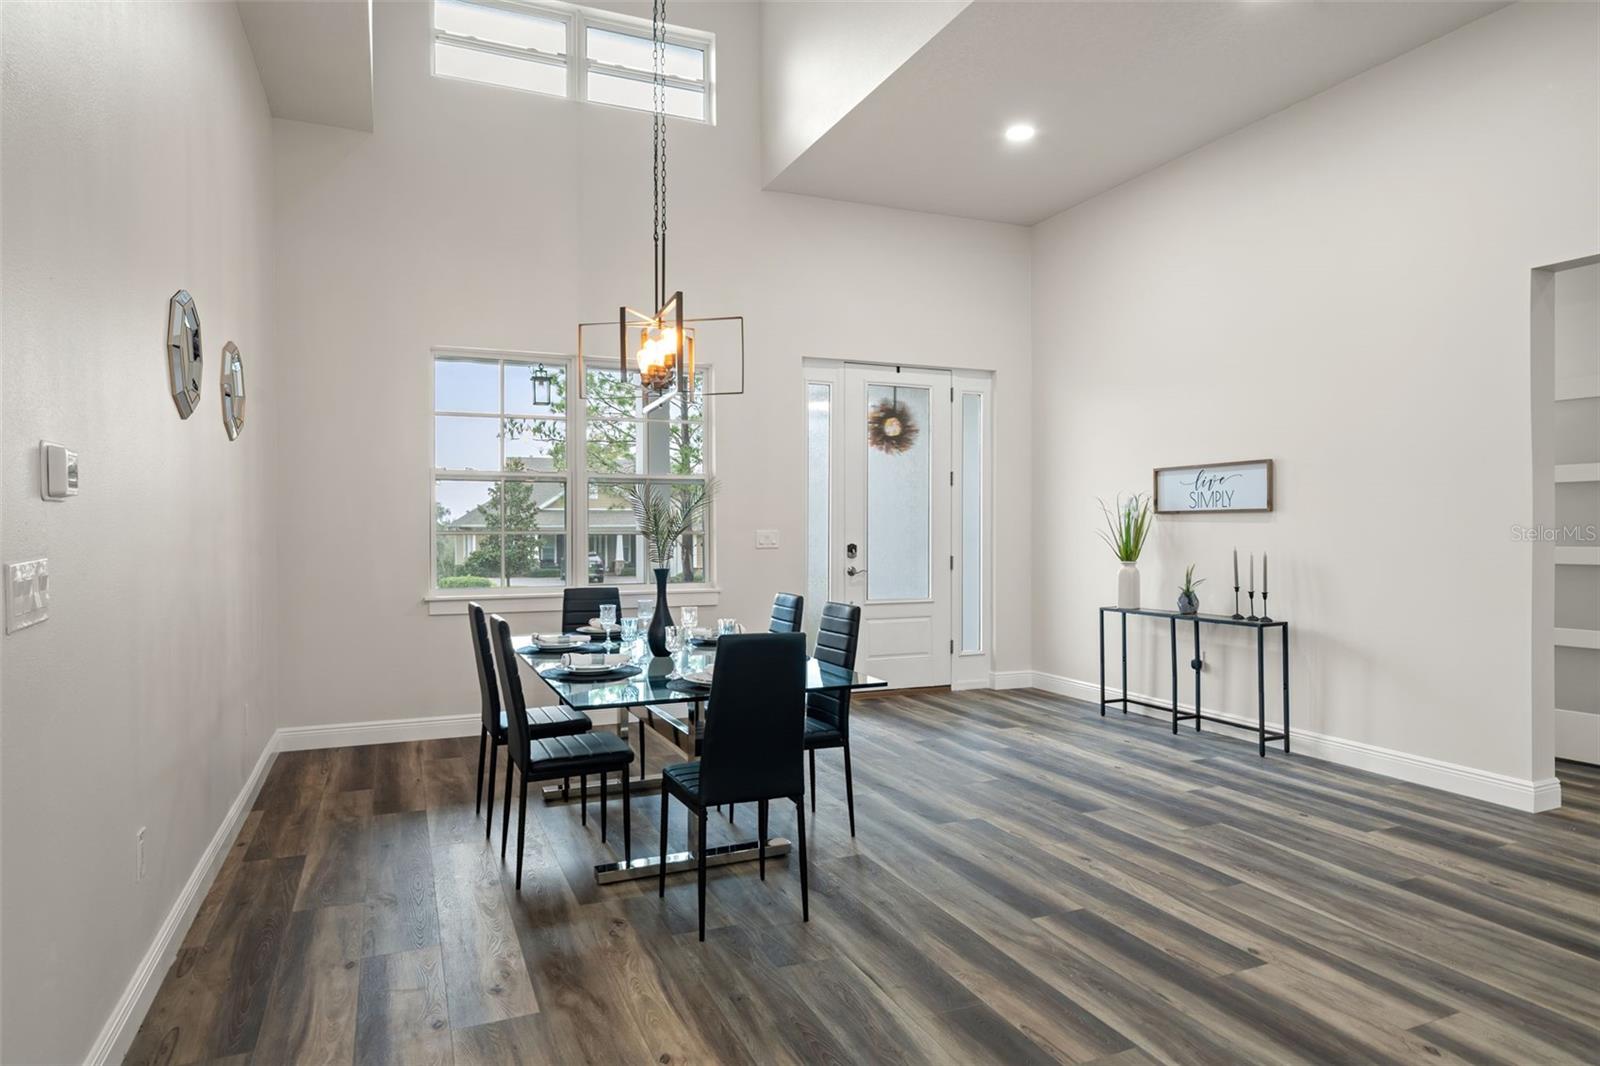 High Ceilings with natural light in the dining area!